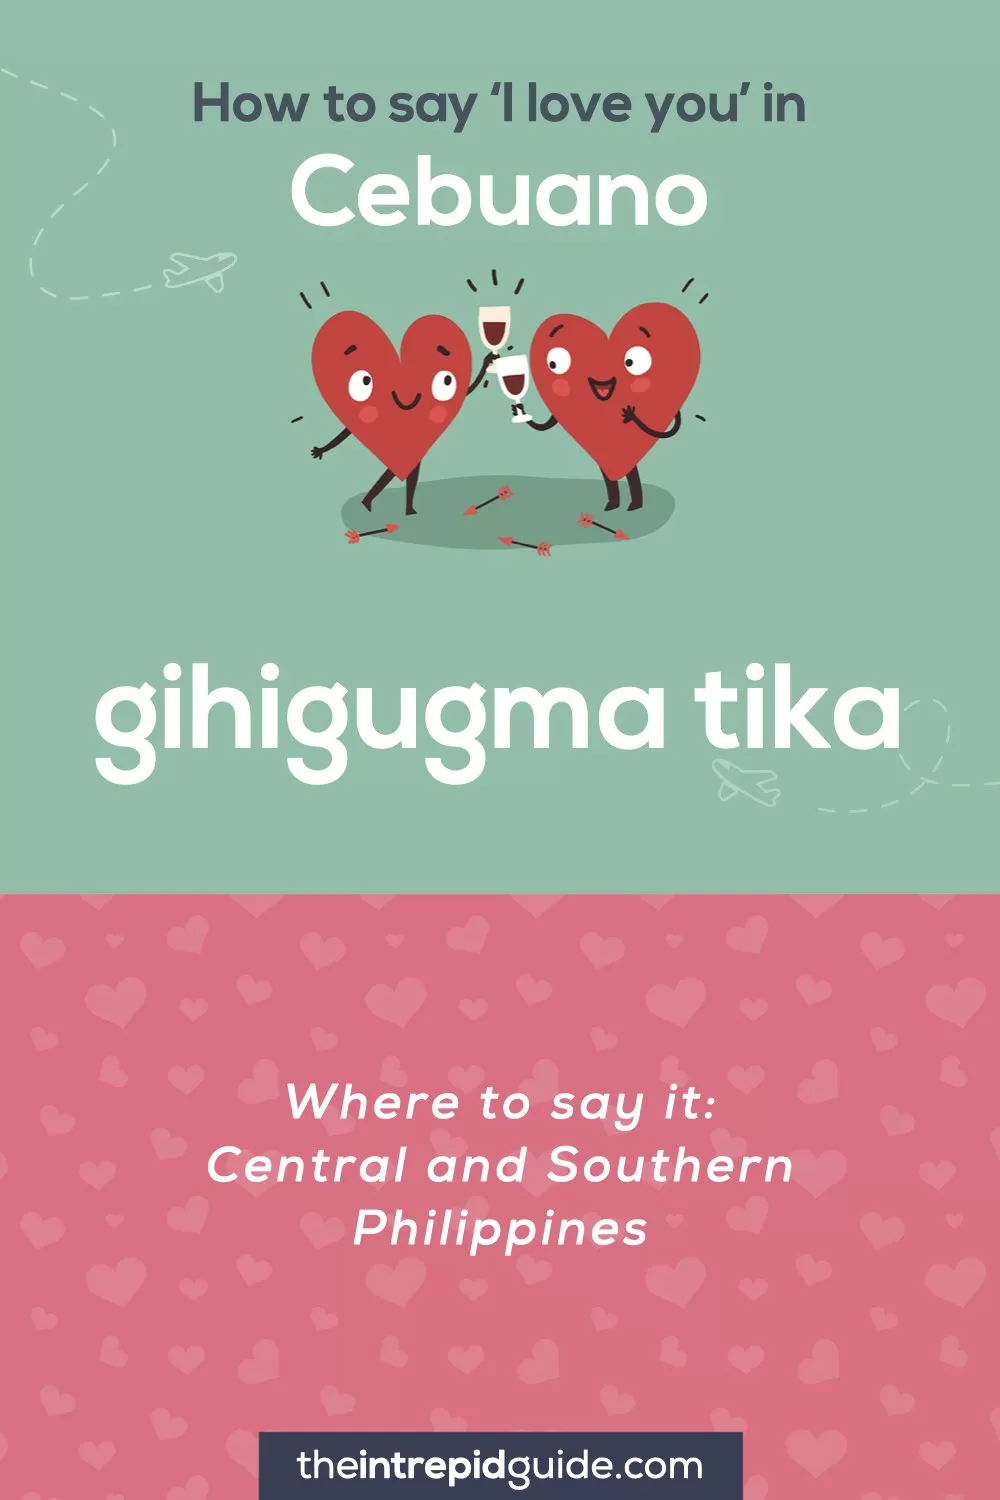 How to say I love you in different languages - Cebuano - gihigugma tika